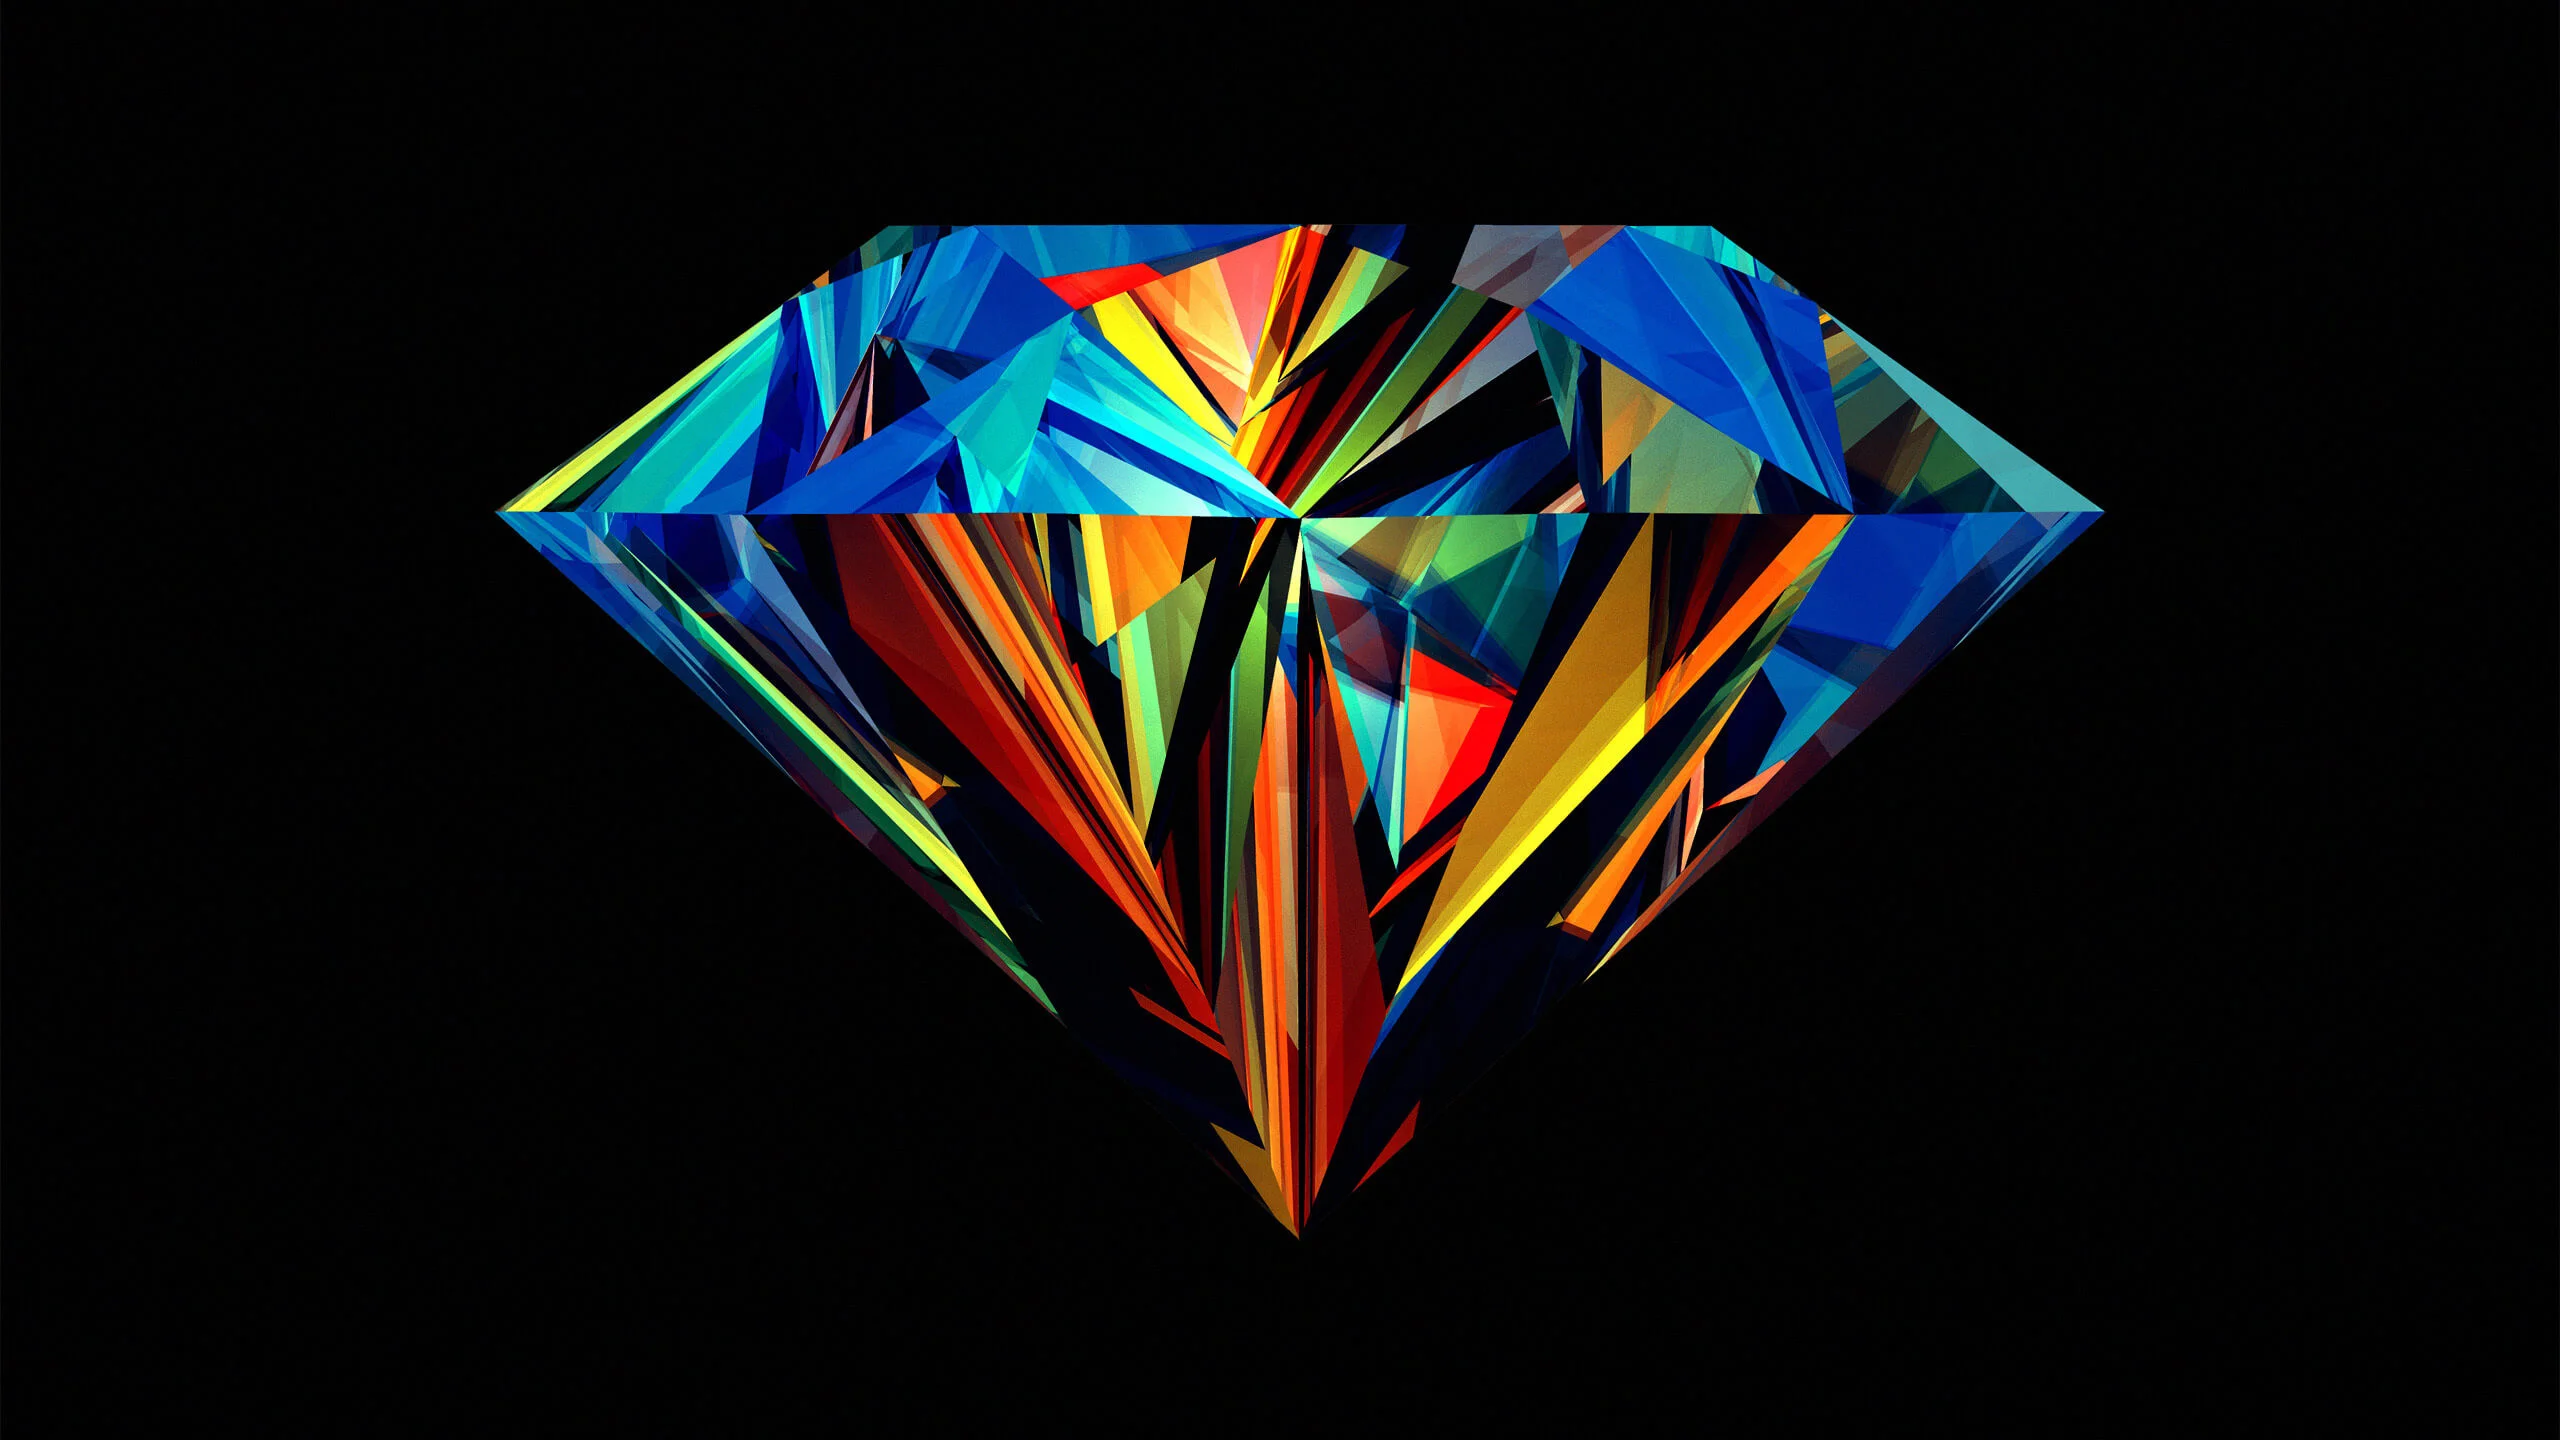 Colorful Diamond HD wallpaper for Youtube Channel Art – HDwallpapers .